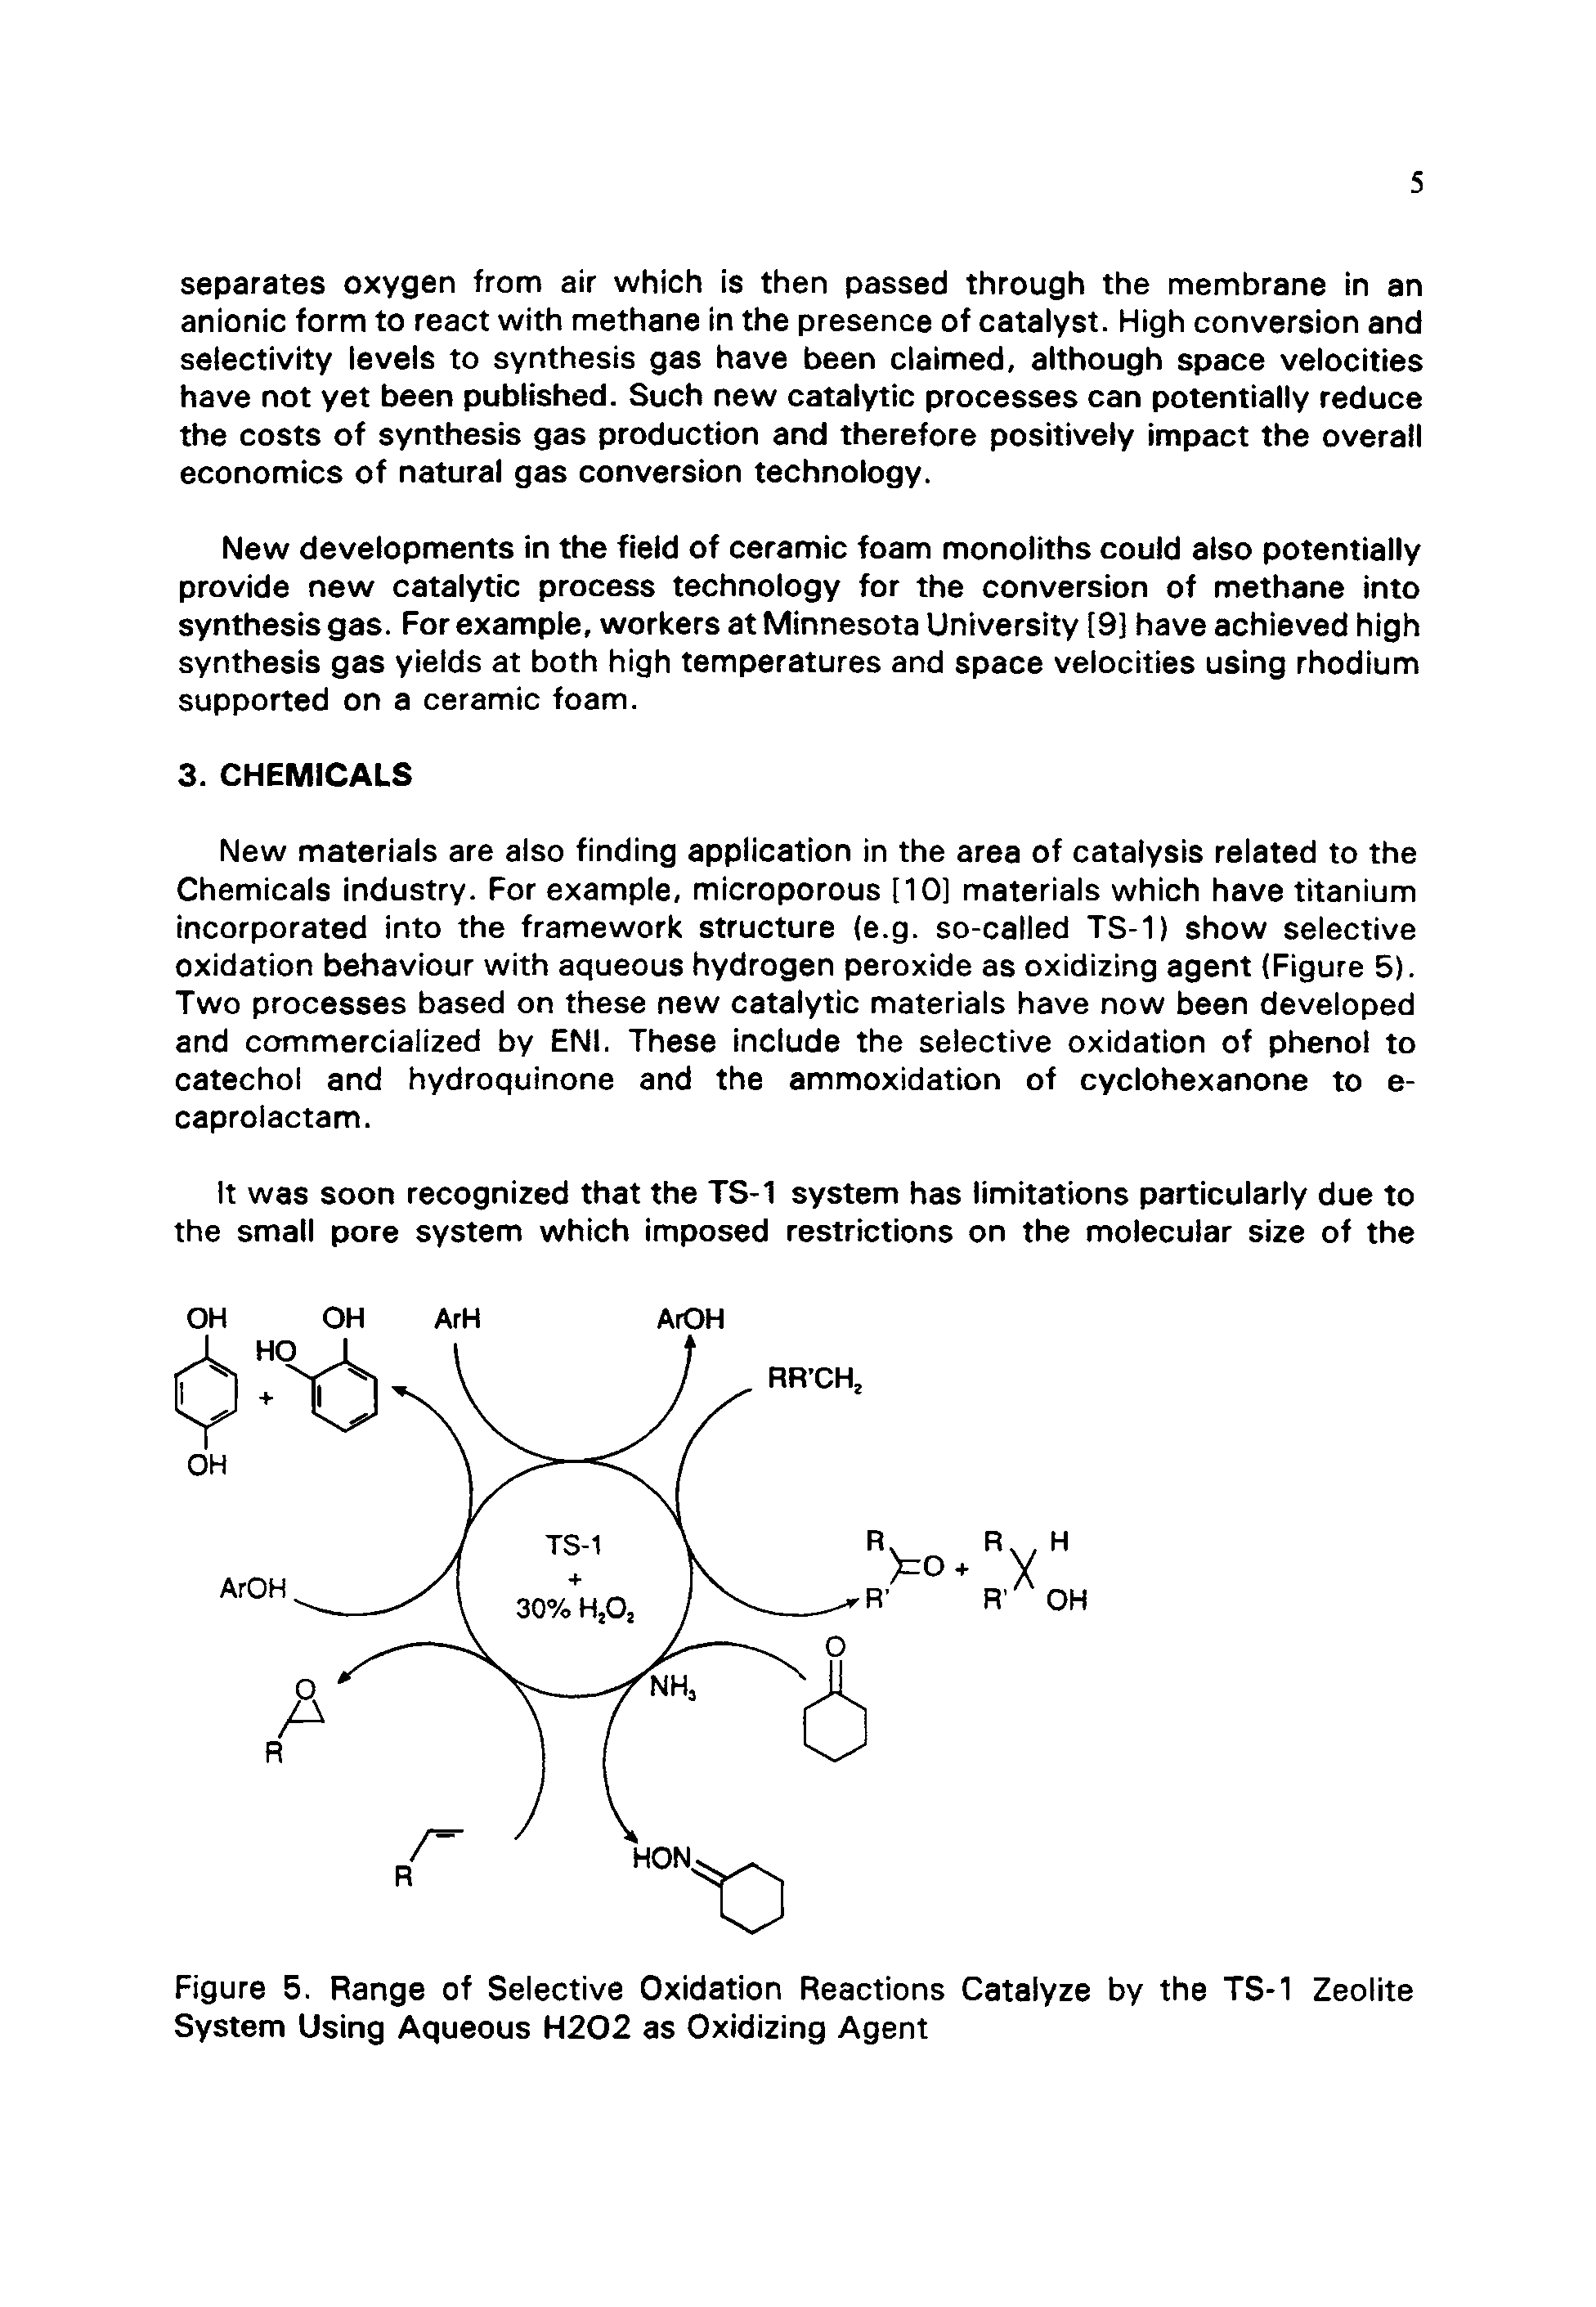 Figure 5. Range of Selective Oxidation Reactions Catalyze by the TS-1 Zeolite System Using Aqueous H202 as Oxidizing Agent...